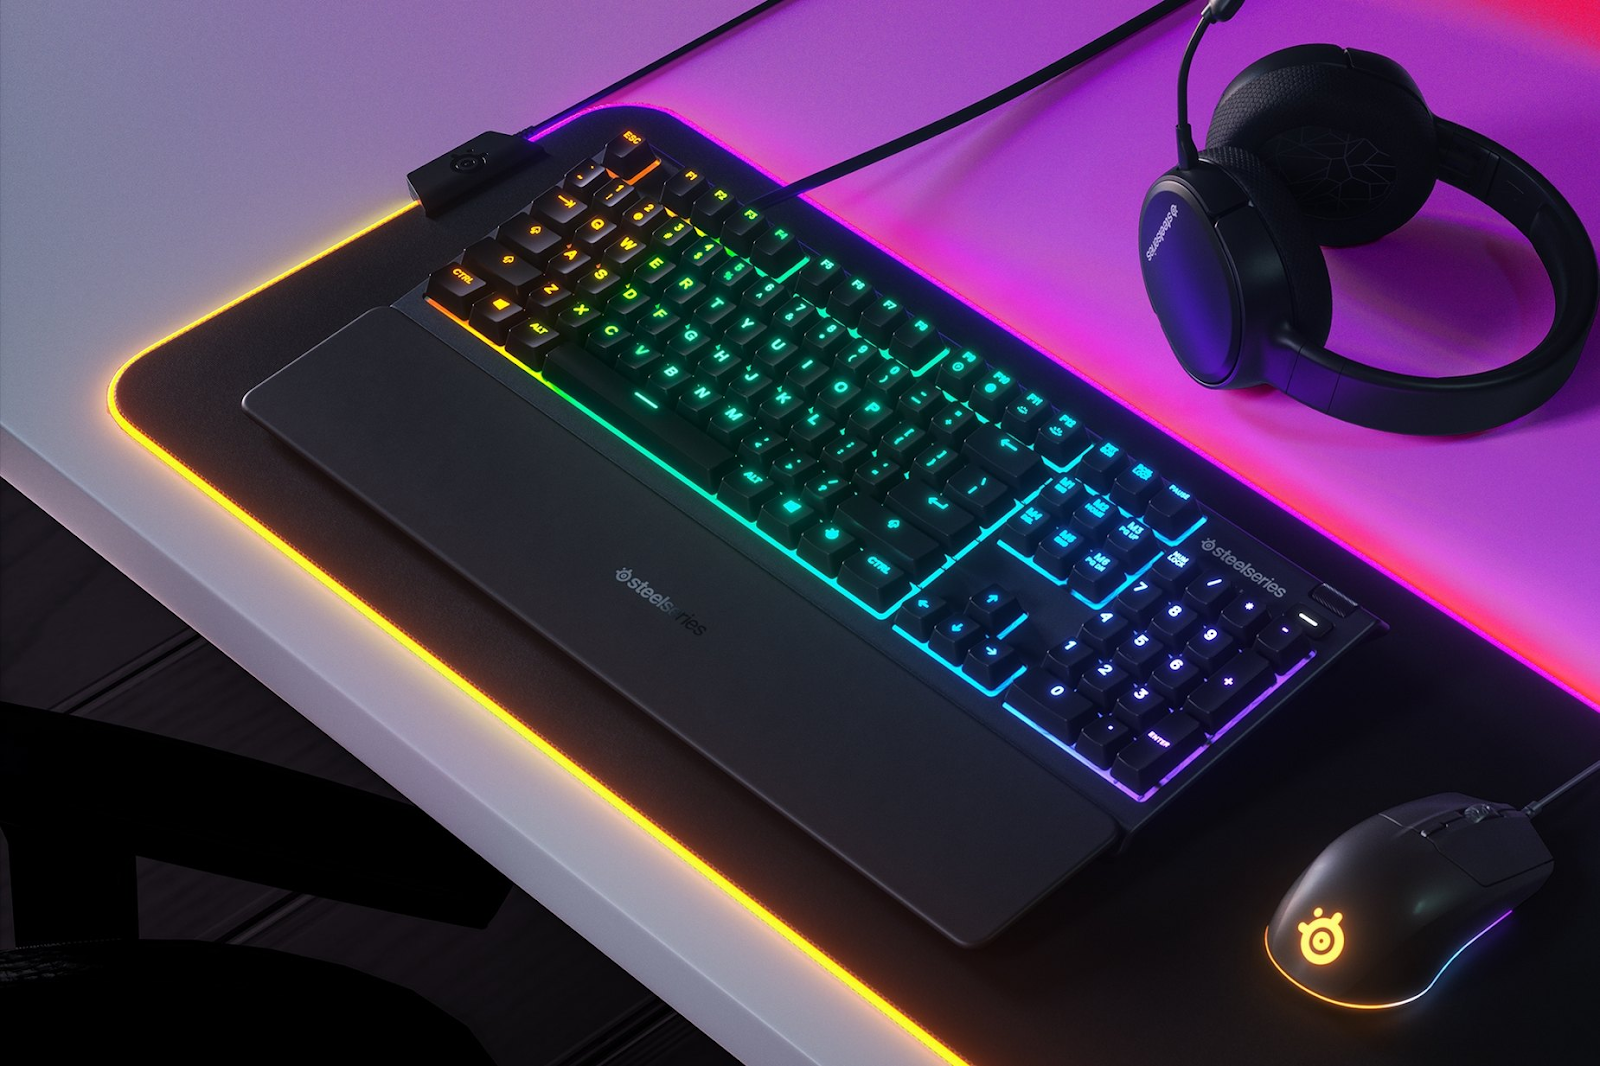 A Steelseries keyboard, headset and mouse appear backlit by a neon pink light